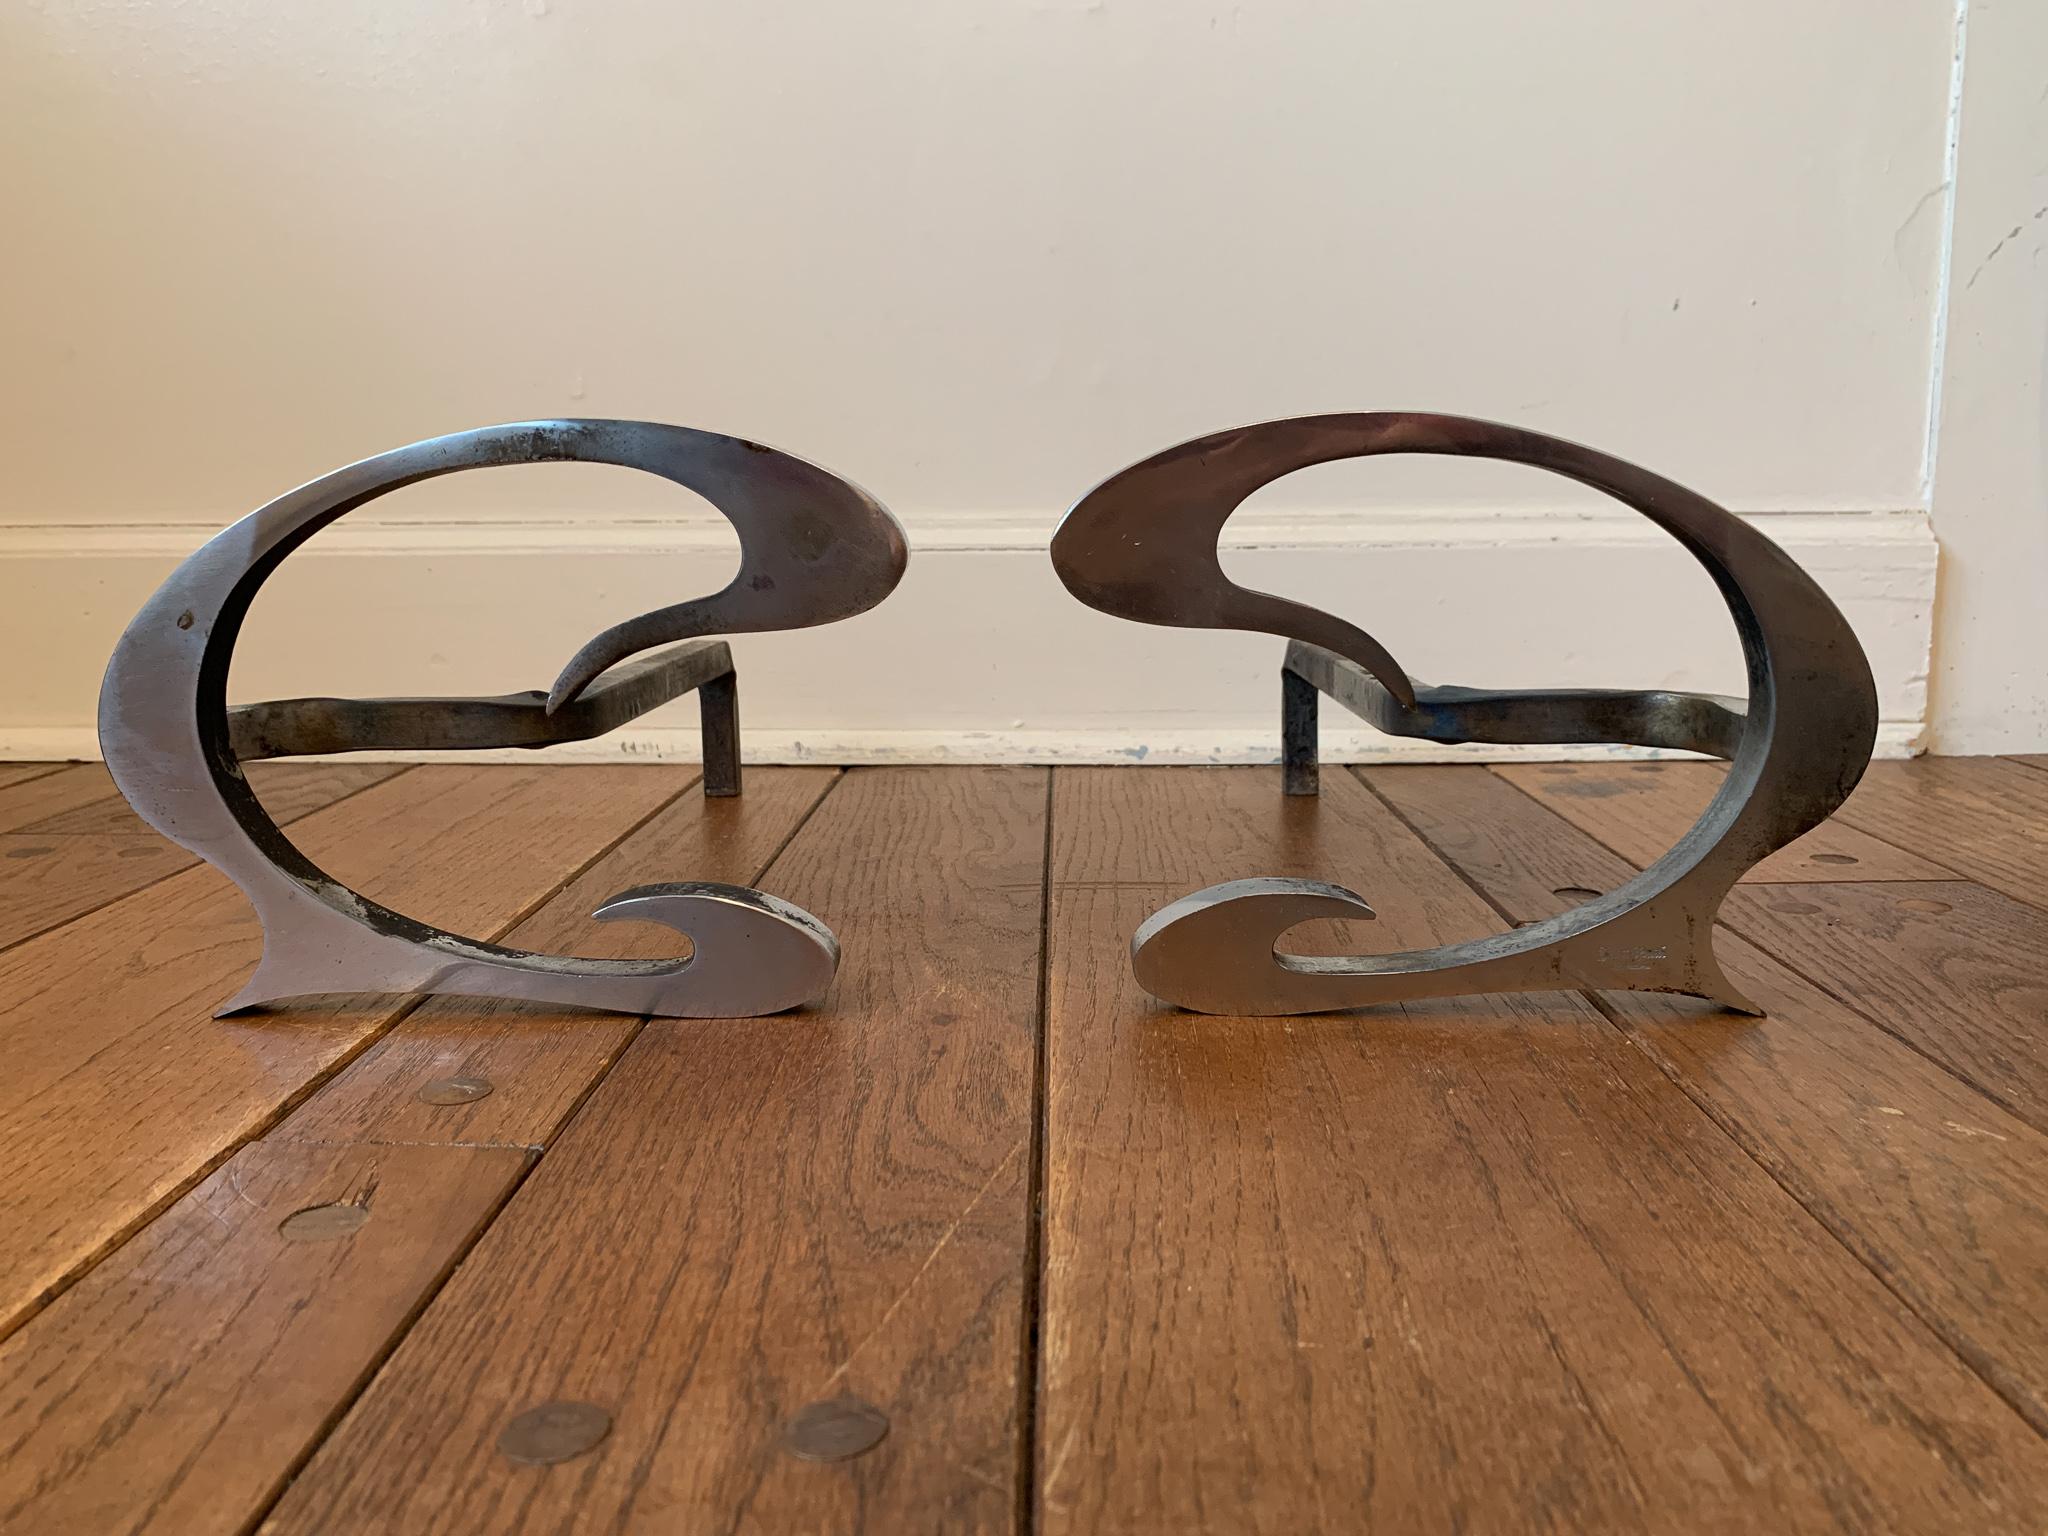 Metalwork Jean-Paul Créations, Rarely Complete Modernist Fireplace Set, France 1970's For Sale